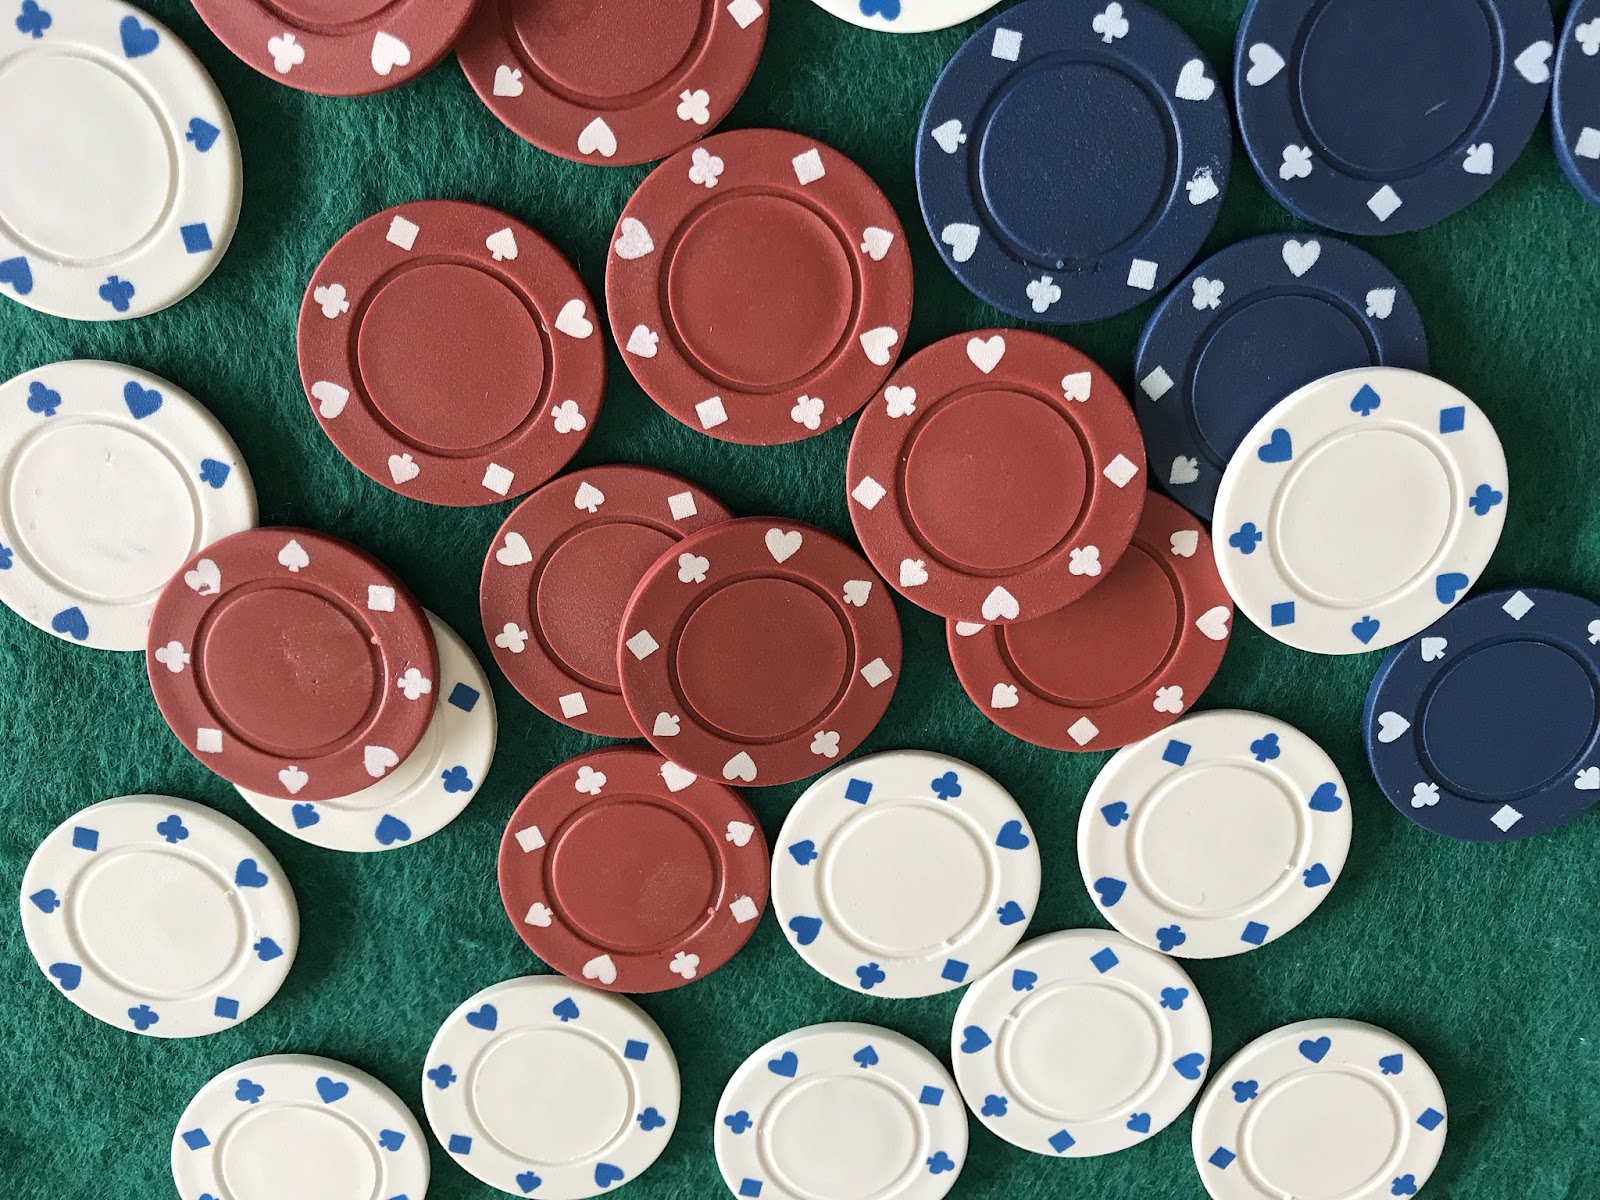 A Short History of Casino Chips